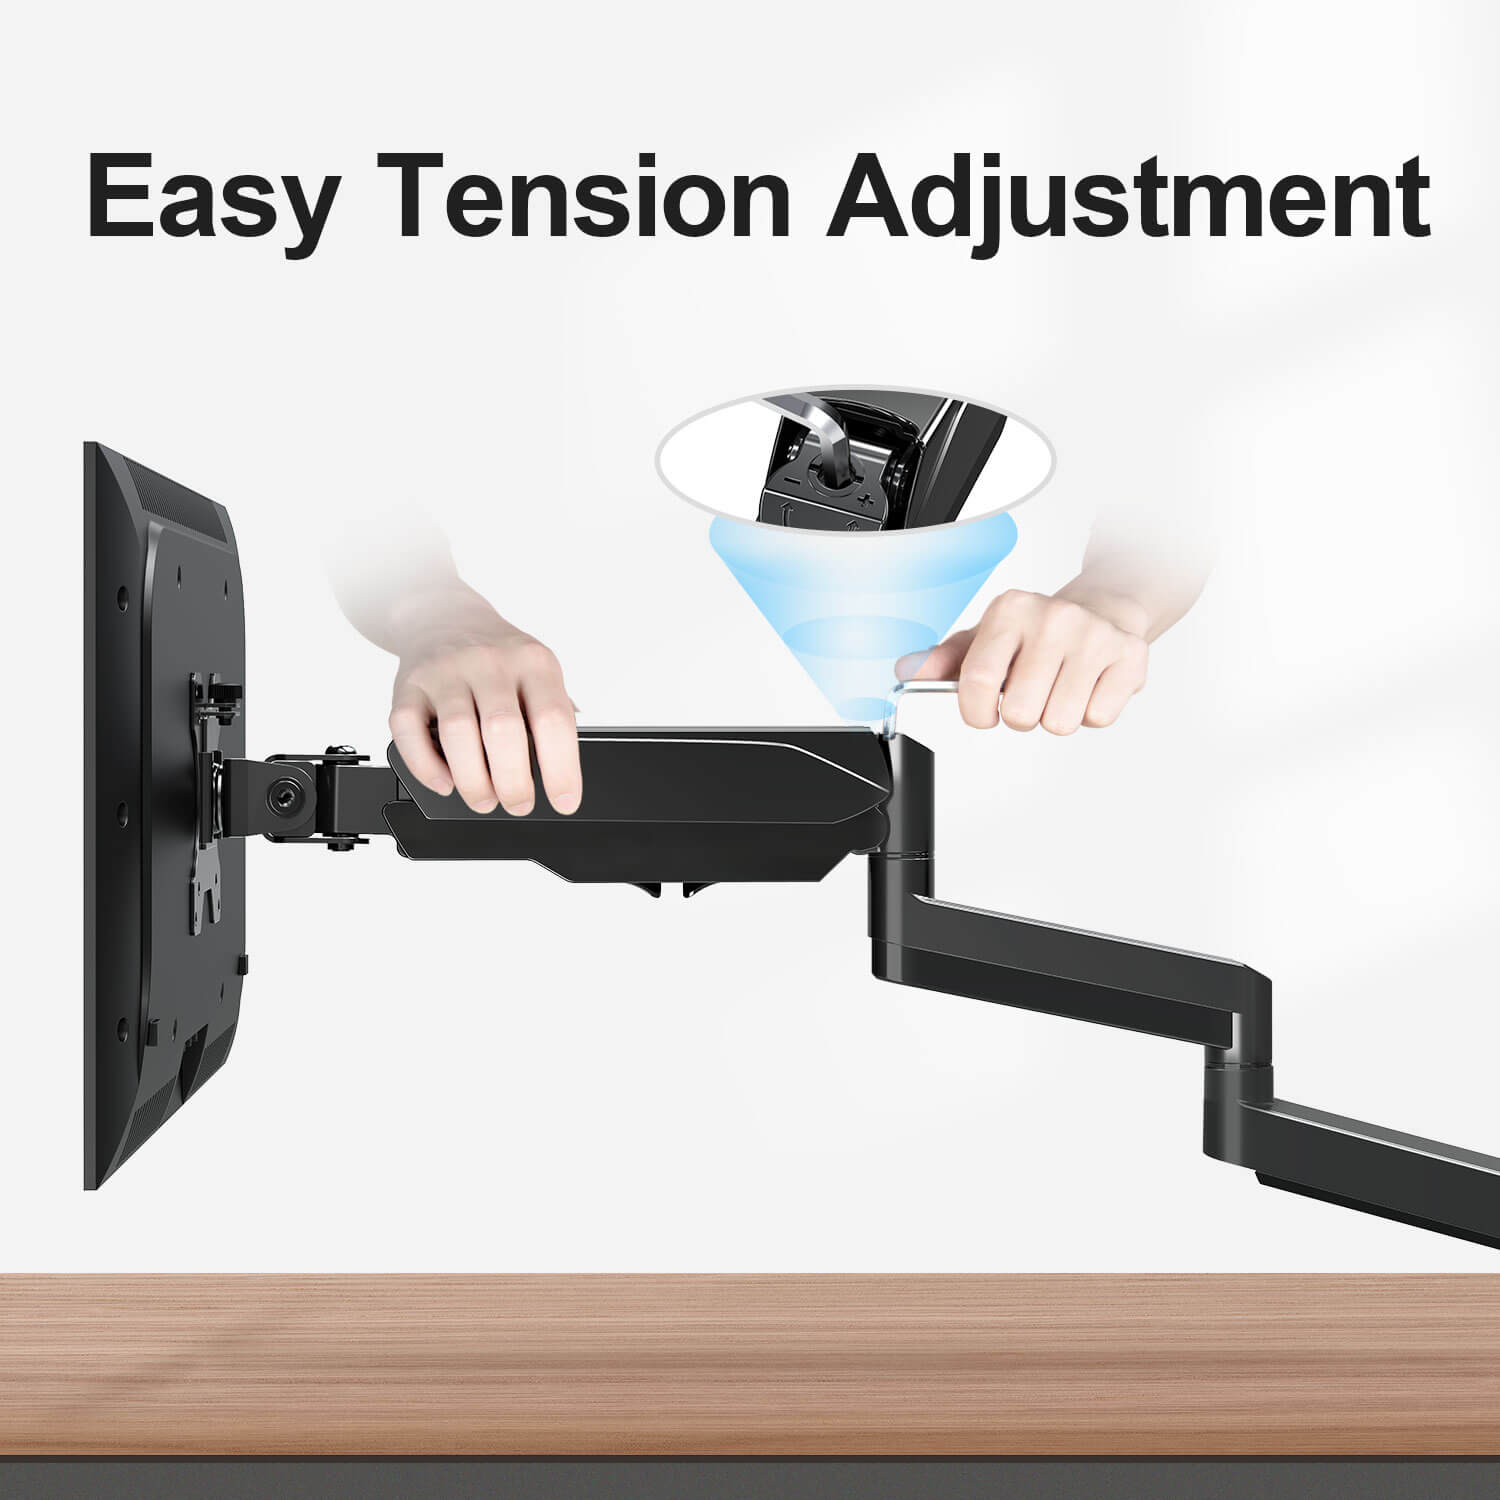 easily increase or decrease the tension to adjust the monitor flexibly and smoothly